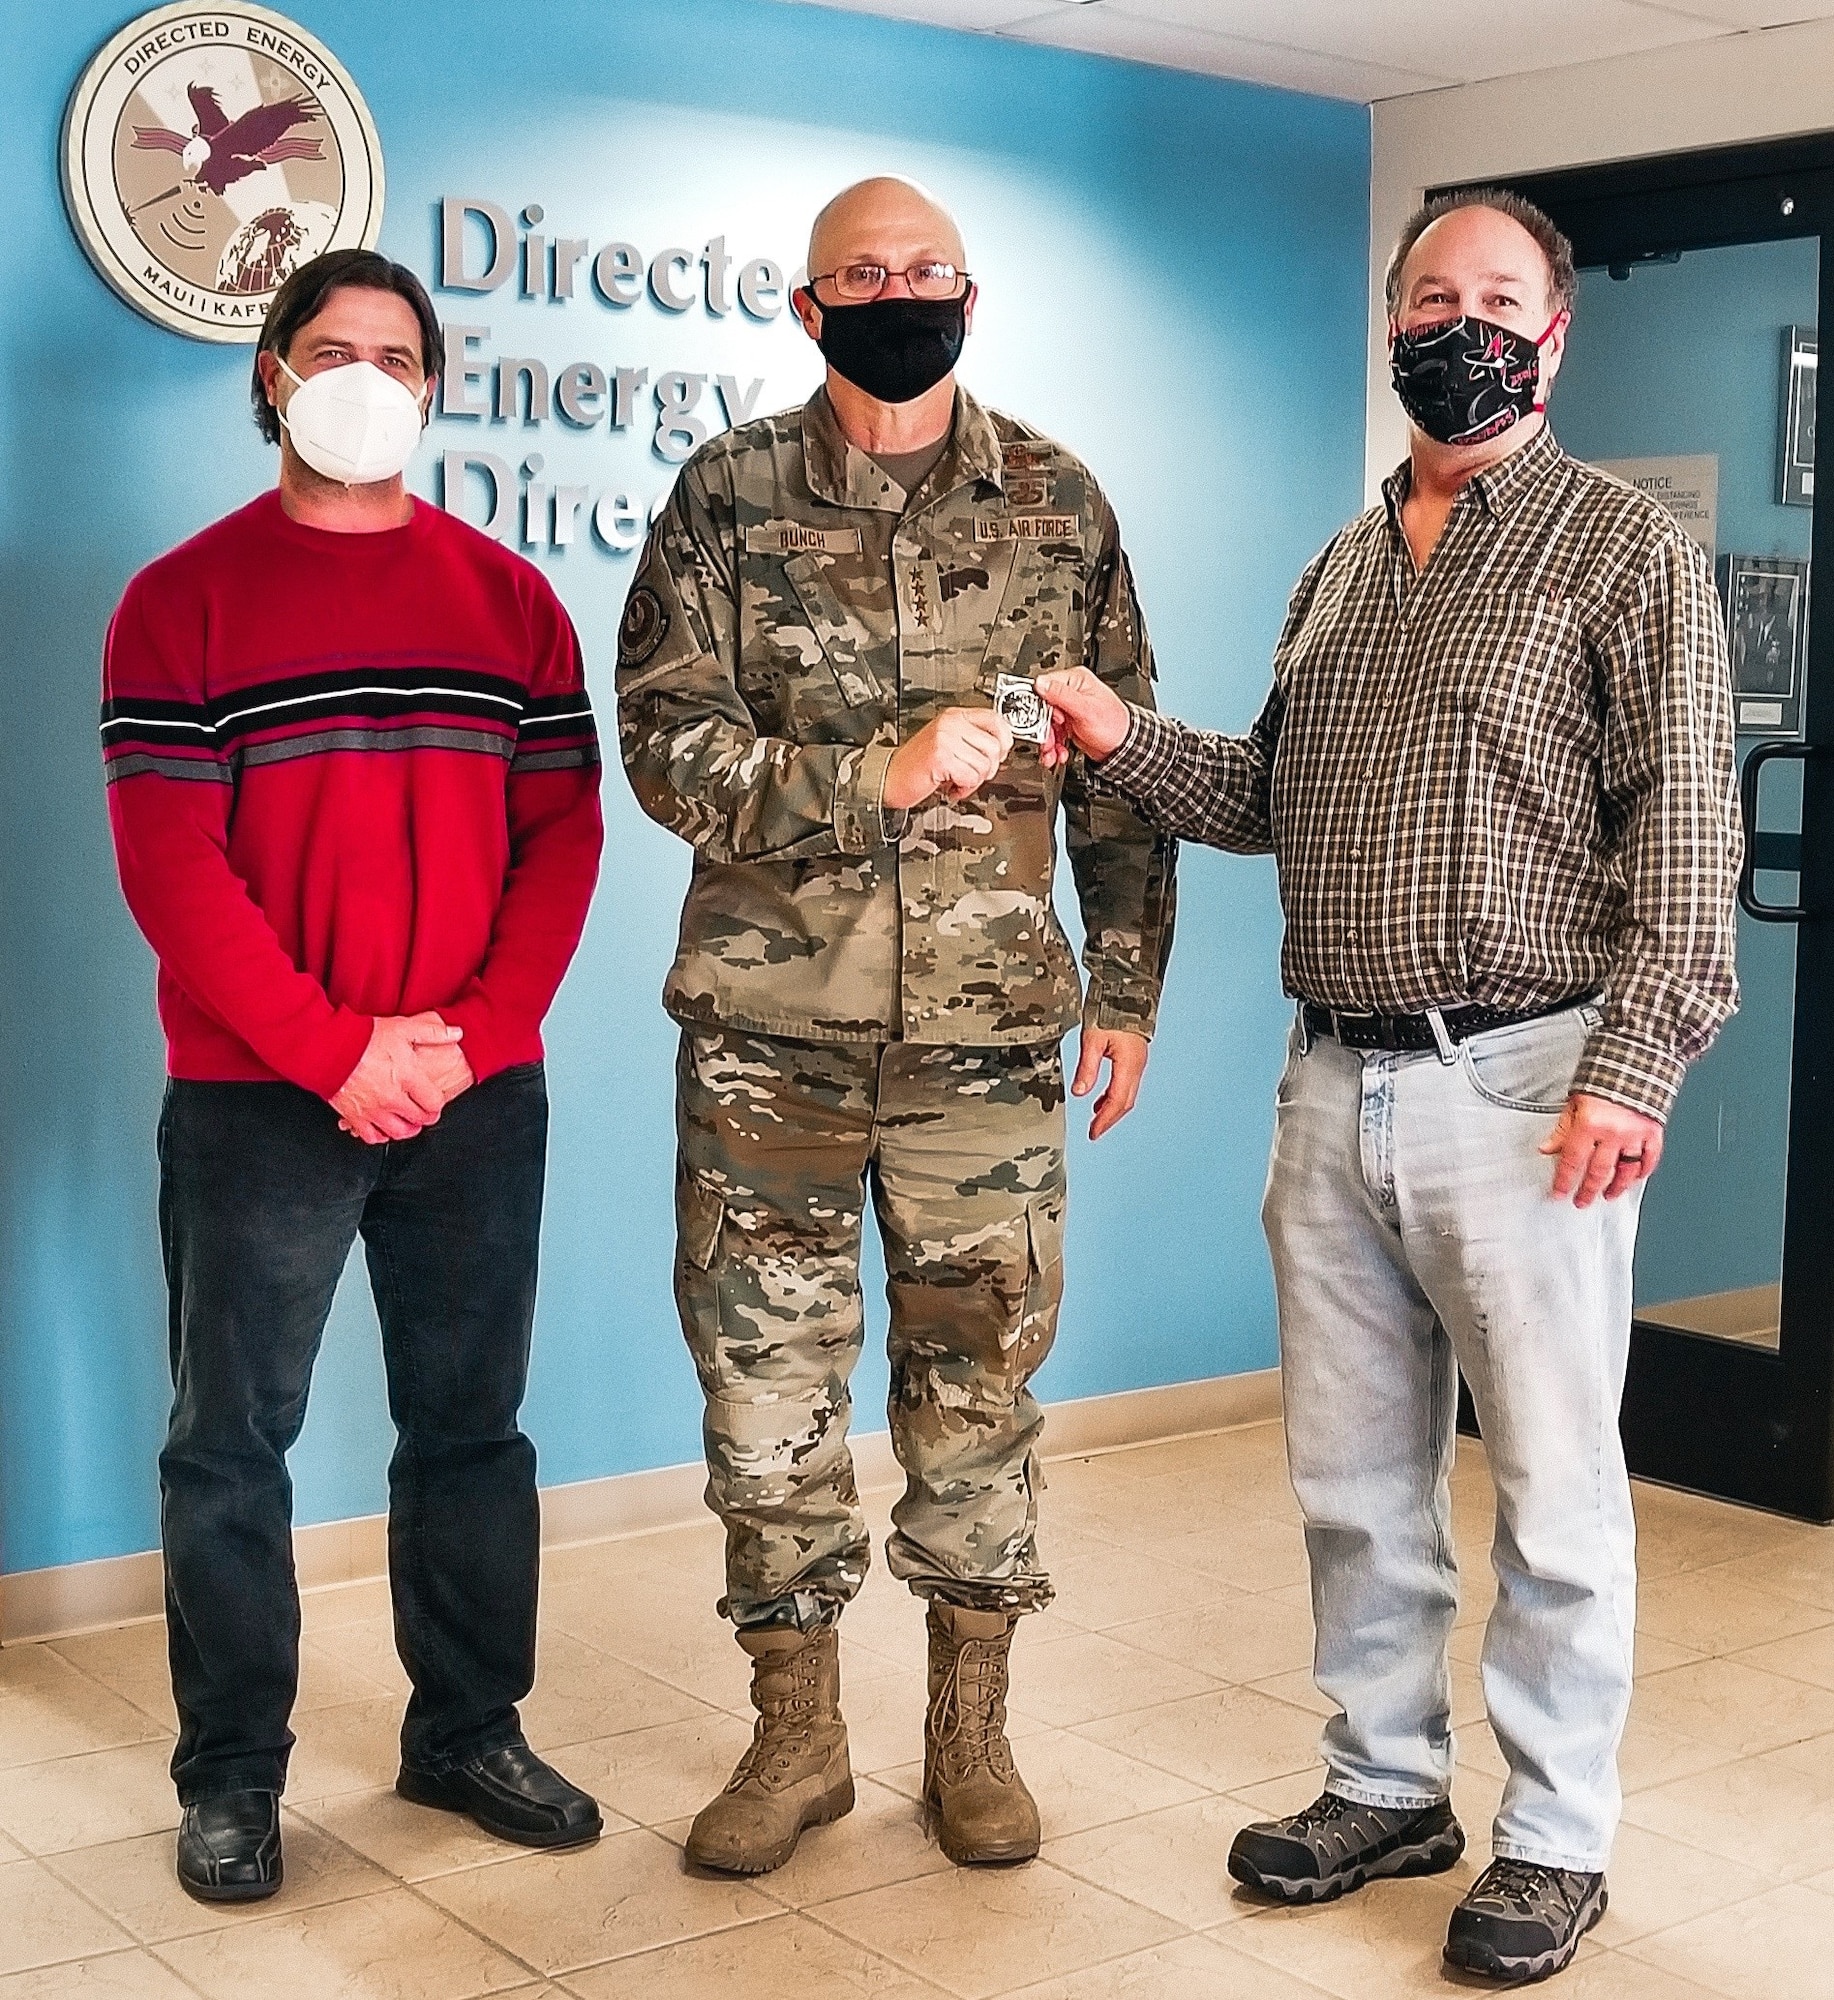 While visiting Kirtland Air Force Base, N.M., Gen. Arnold W. Bunch Jr., commander, Air Force Materiel Command, presented his coveted challenge coin to Pete Finlay (right) and Joe Volza (left) to recognize their team’s contributions in advancing the Air Force’s base defense priorities. (Courtesy photo)